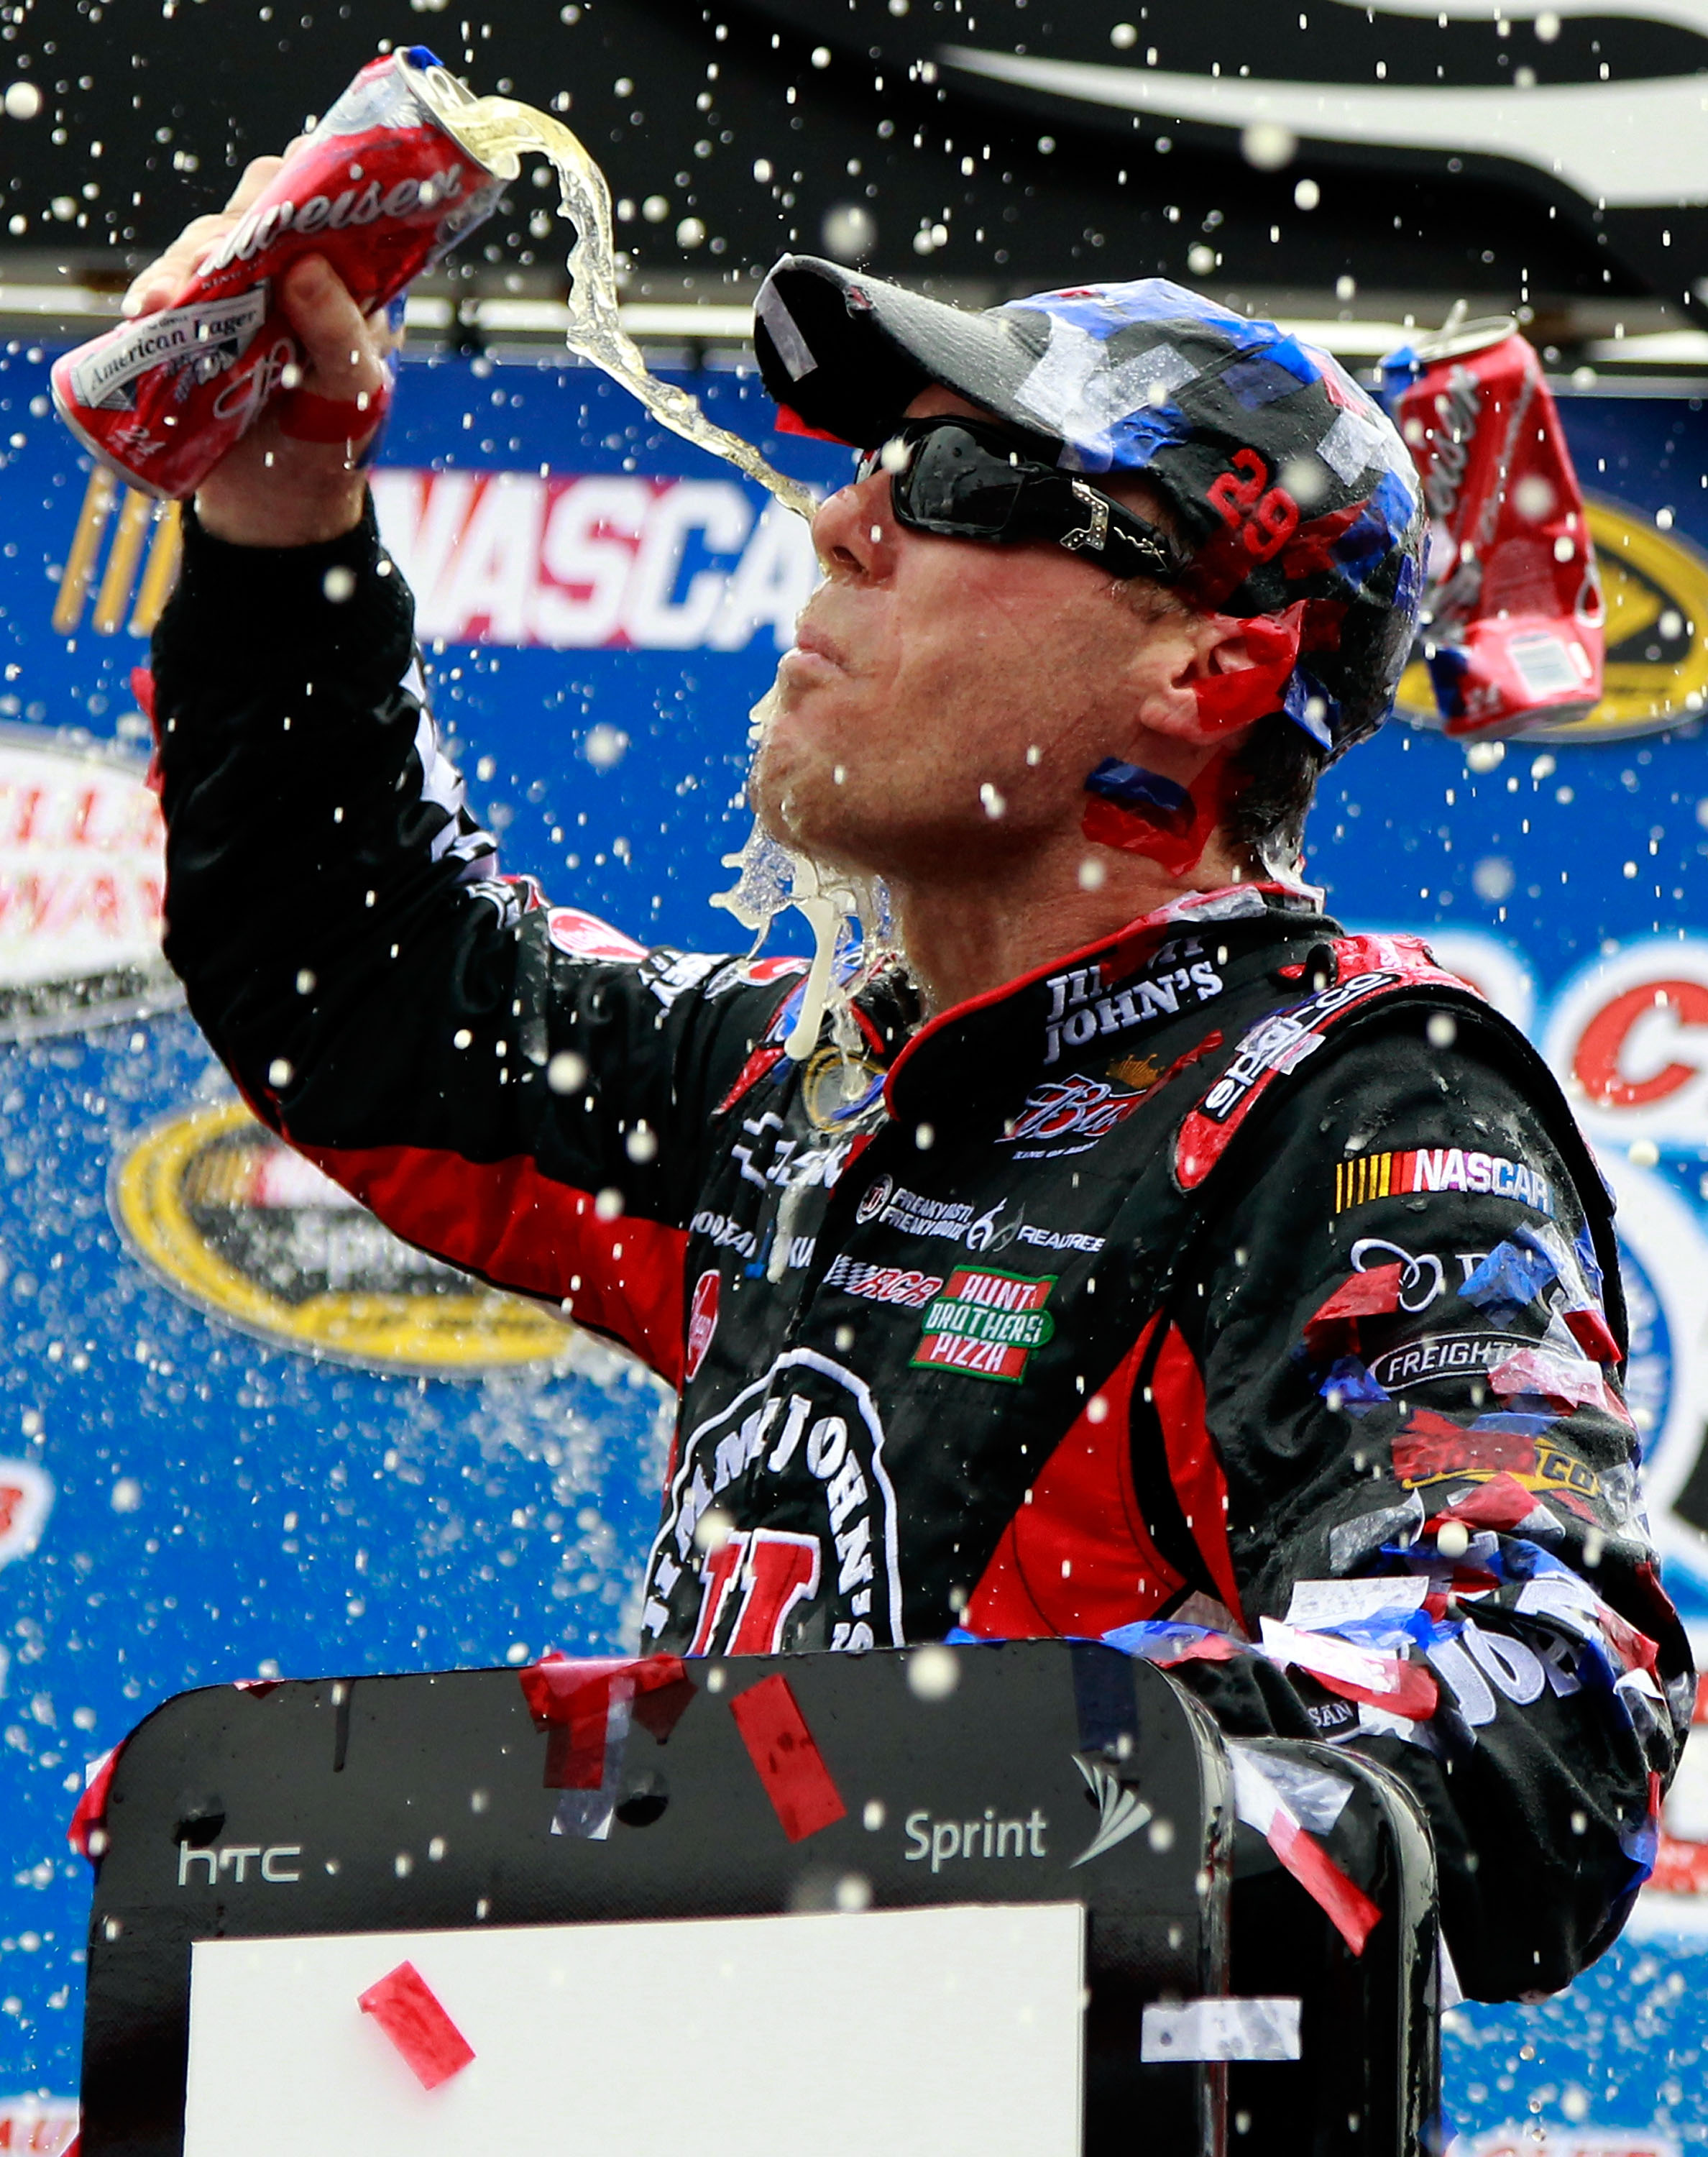 FONTANA, CA - MARCH 27:  Kevin Harvick, driver of the #29 Jimmy John's Chevrolet, celebrates in victory lane after winning the NASCAR Sprint Cup Series Auto Club 400 at Auto Club Speedway on March 27, 2011 in Fontana, California.  (Photo by Tom Pennington